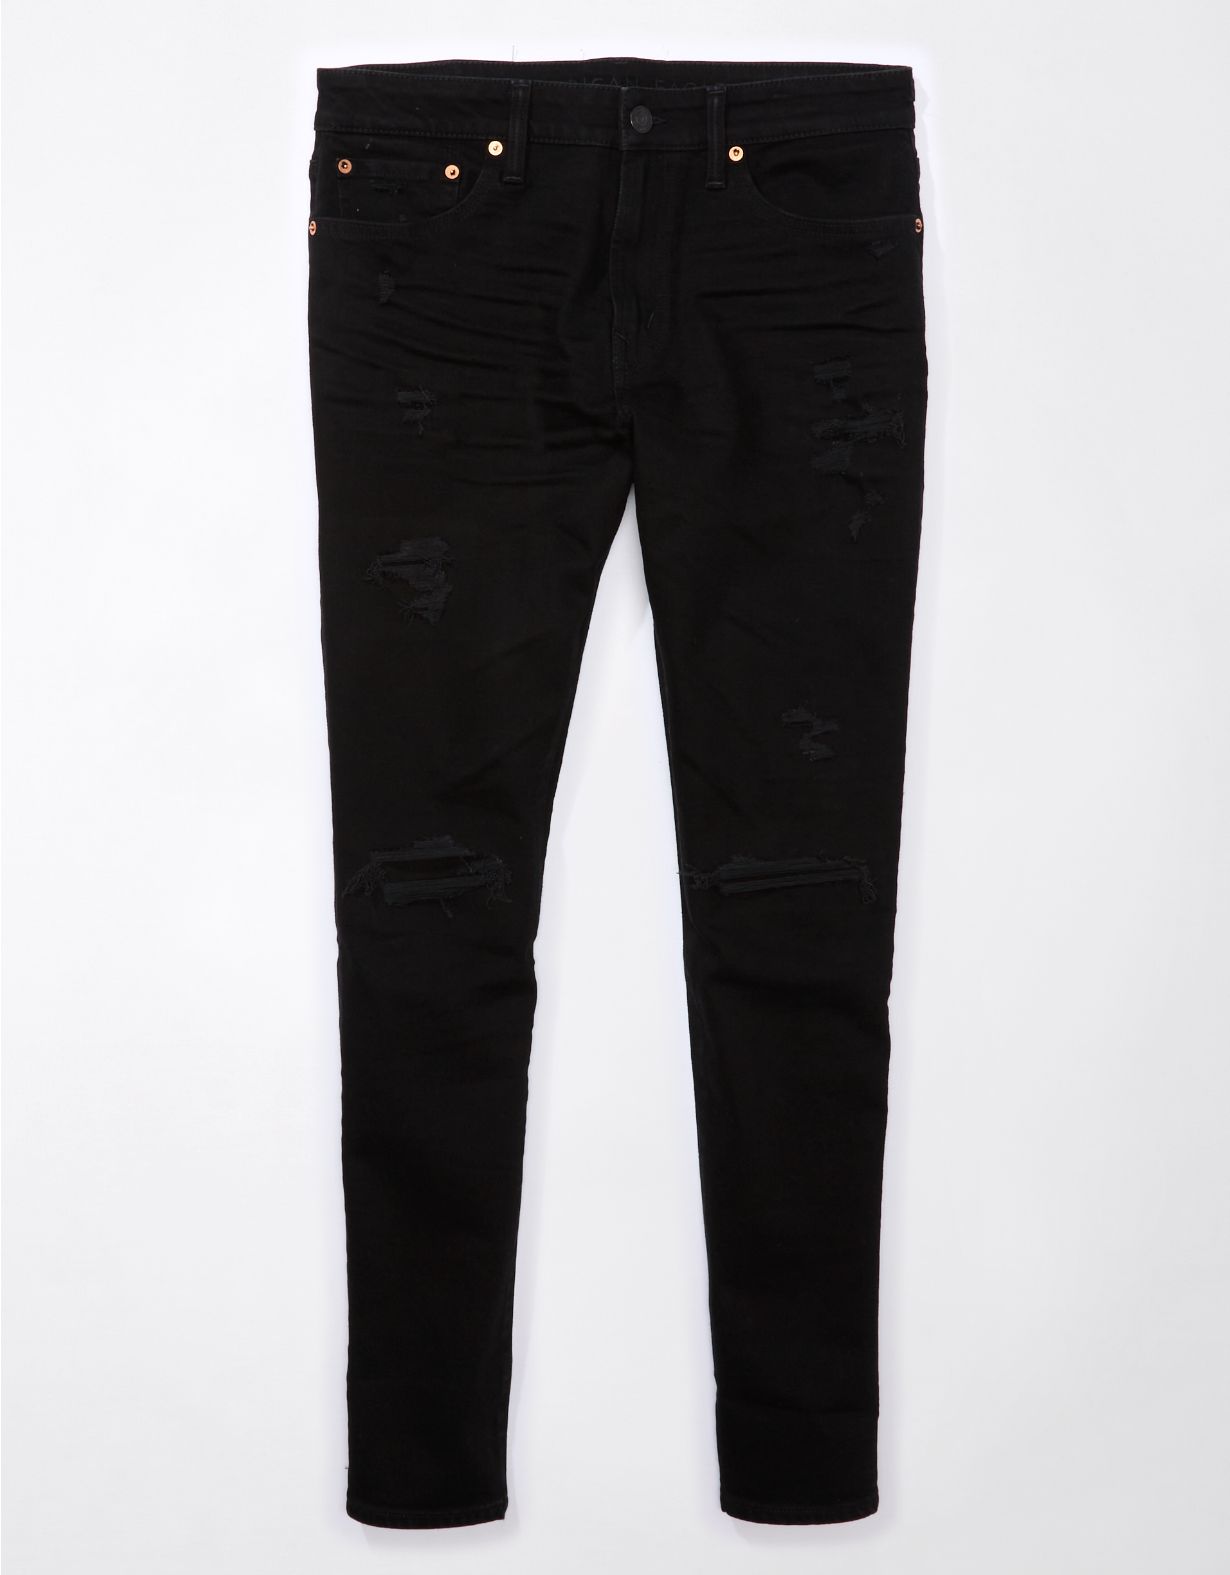 AE AirFlex+ Patched Ultrasoft Athletic Skinny Jean